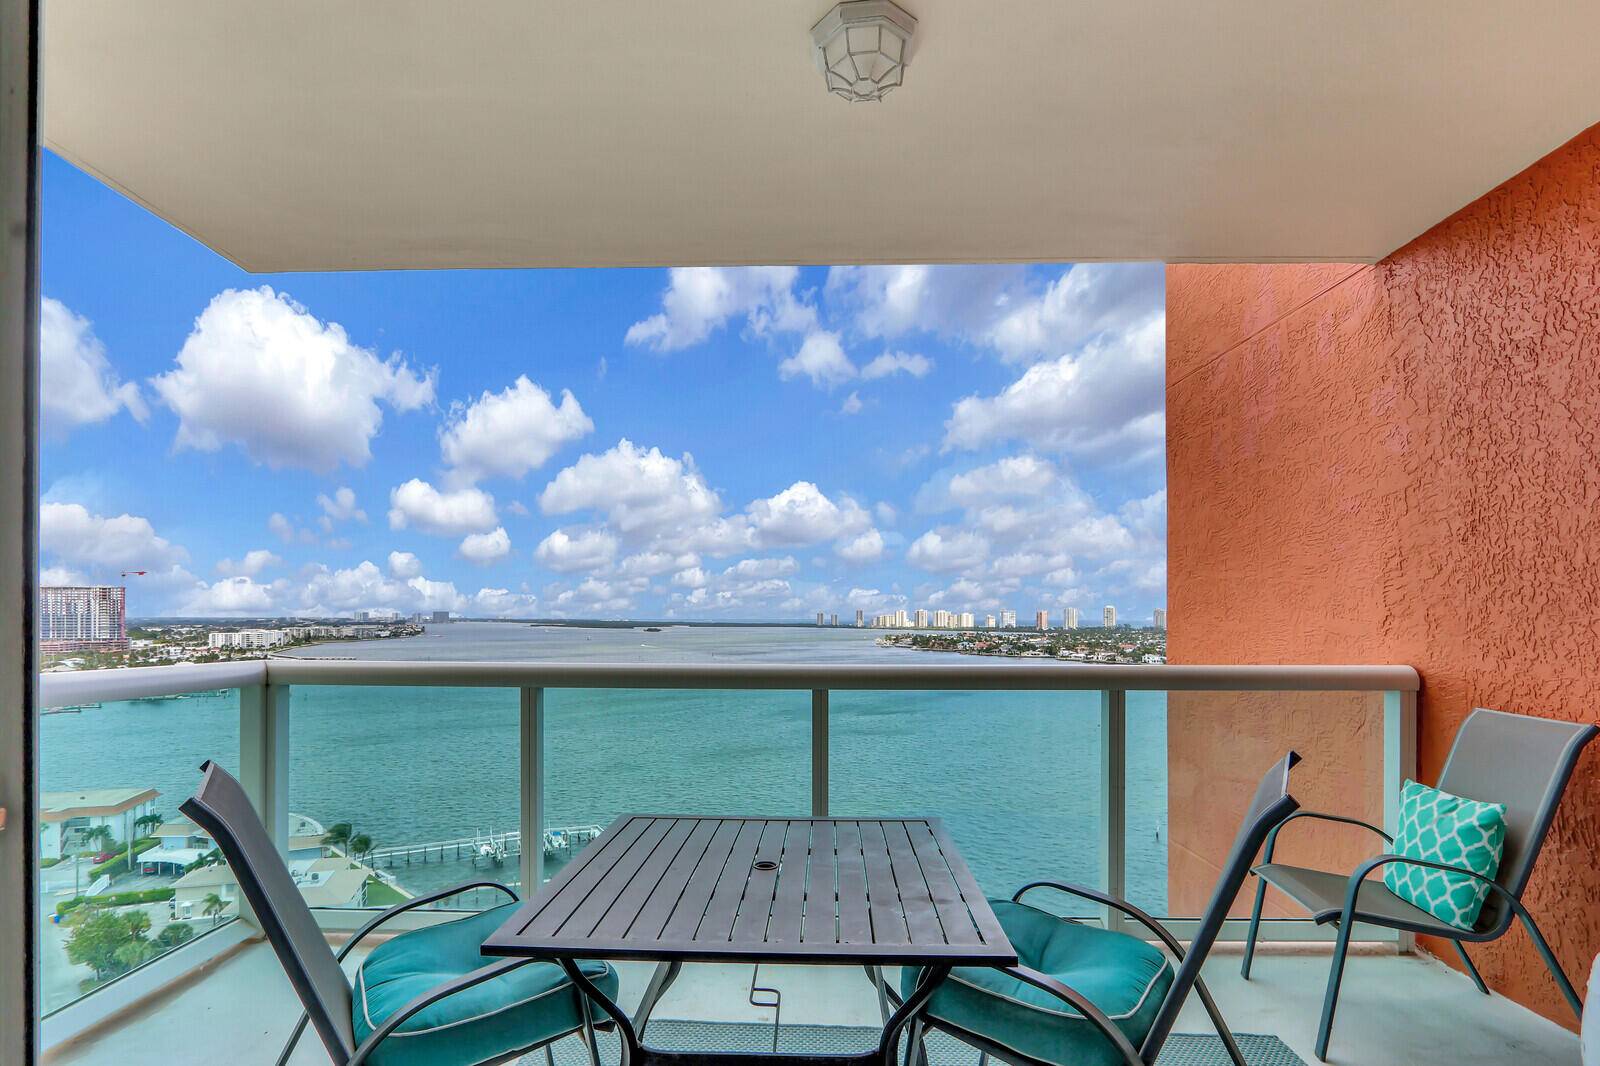 VIEWS VIEWS VIEWS ! ! ! Enjoy breathtaking open water panoramic views across the intracoastal waterway of MacArthur Park and Singer Island plus views of the ocean from your sunny ...